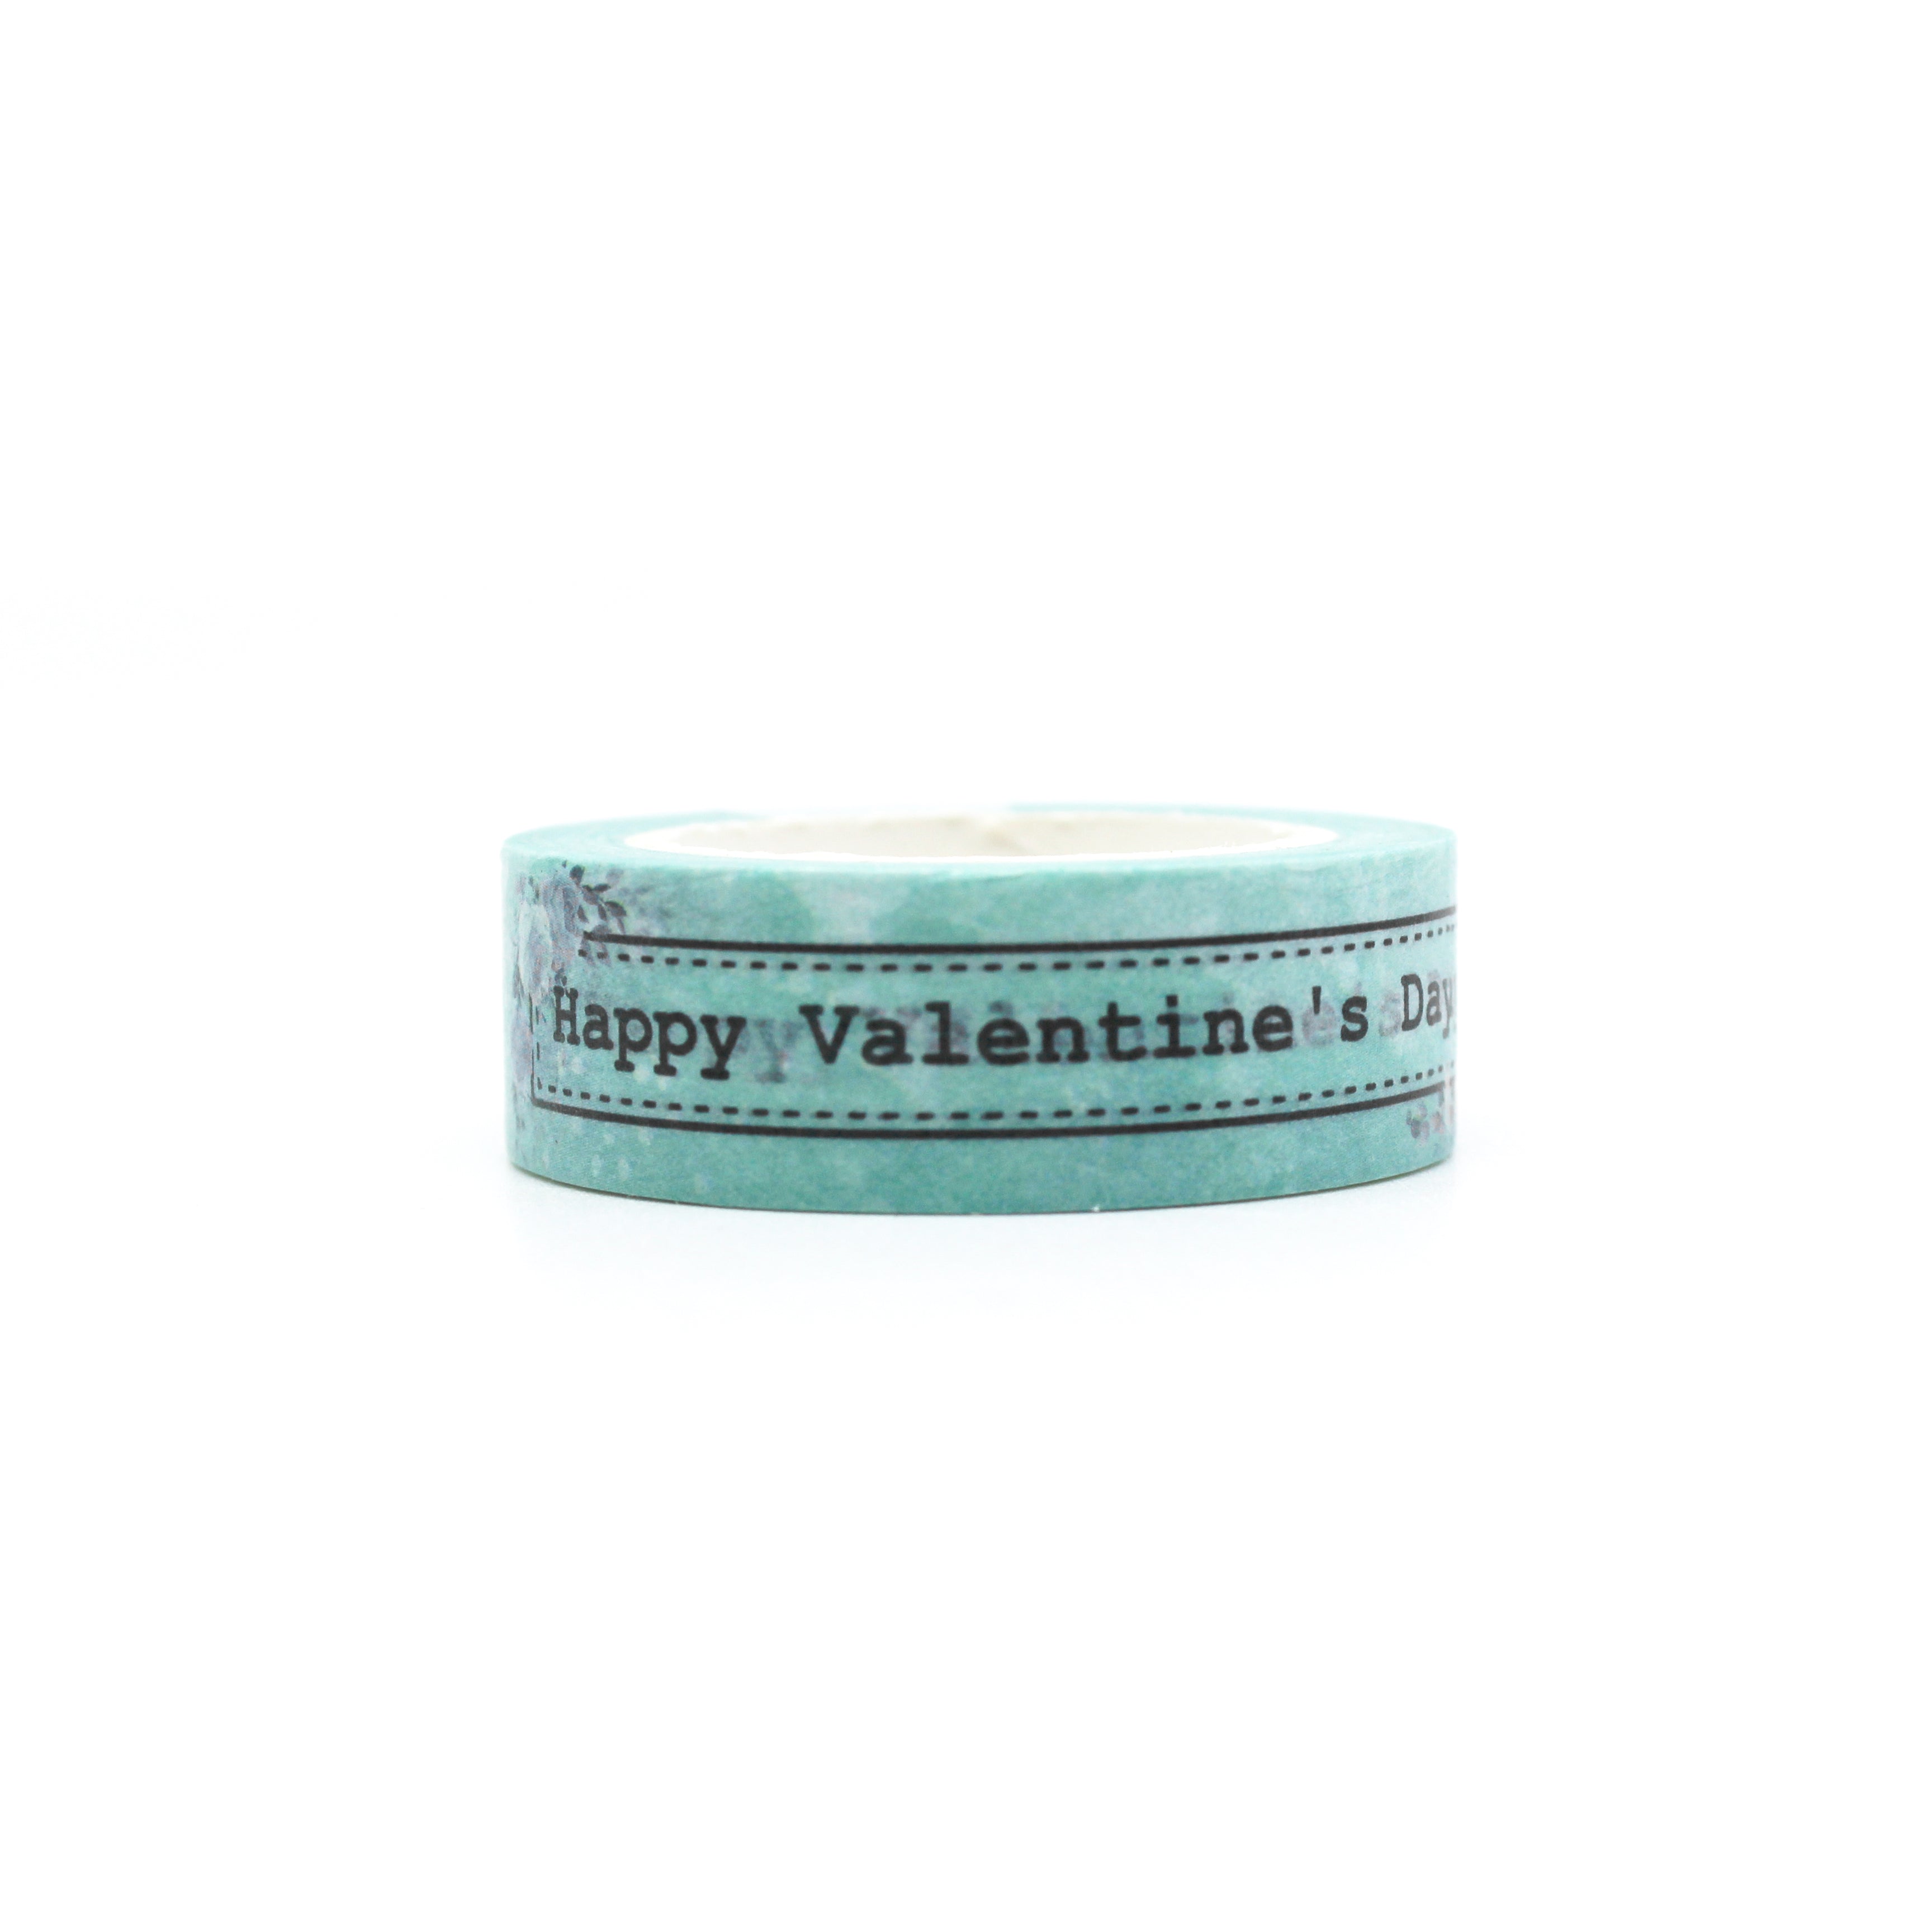 This blue 'Happy Valentine's Day Typogrpahy Text Washi tape is perfect for adding the message of the holiday to your borders and craft projects. This tape is sold at BBB Supplies Craft Shop.